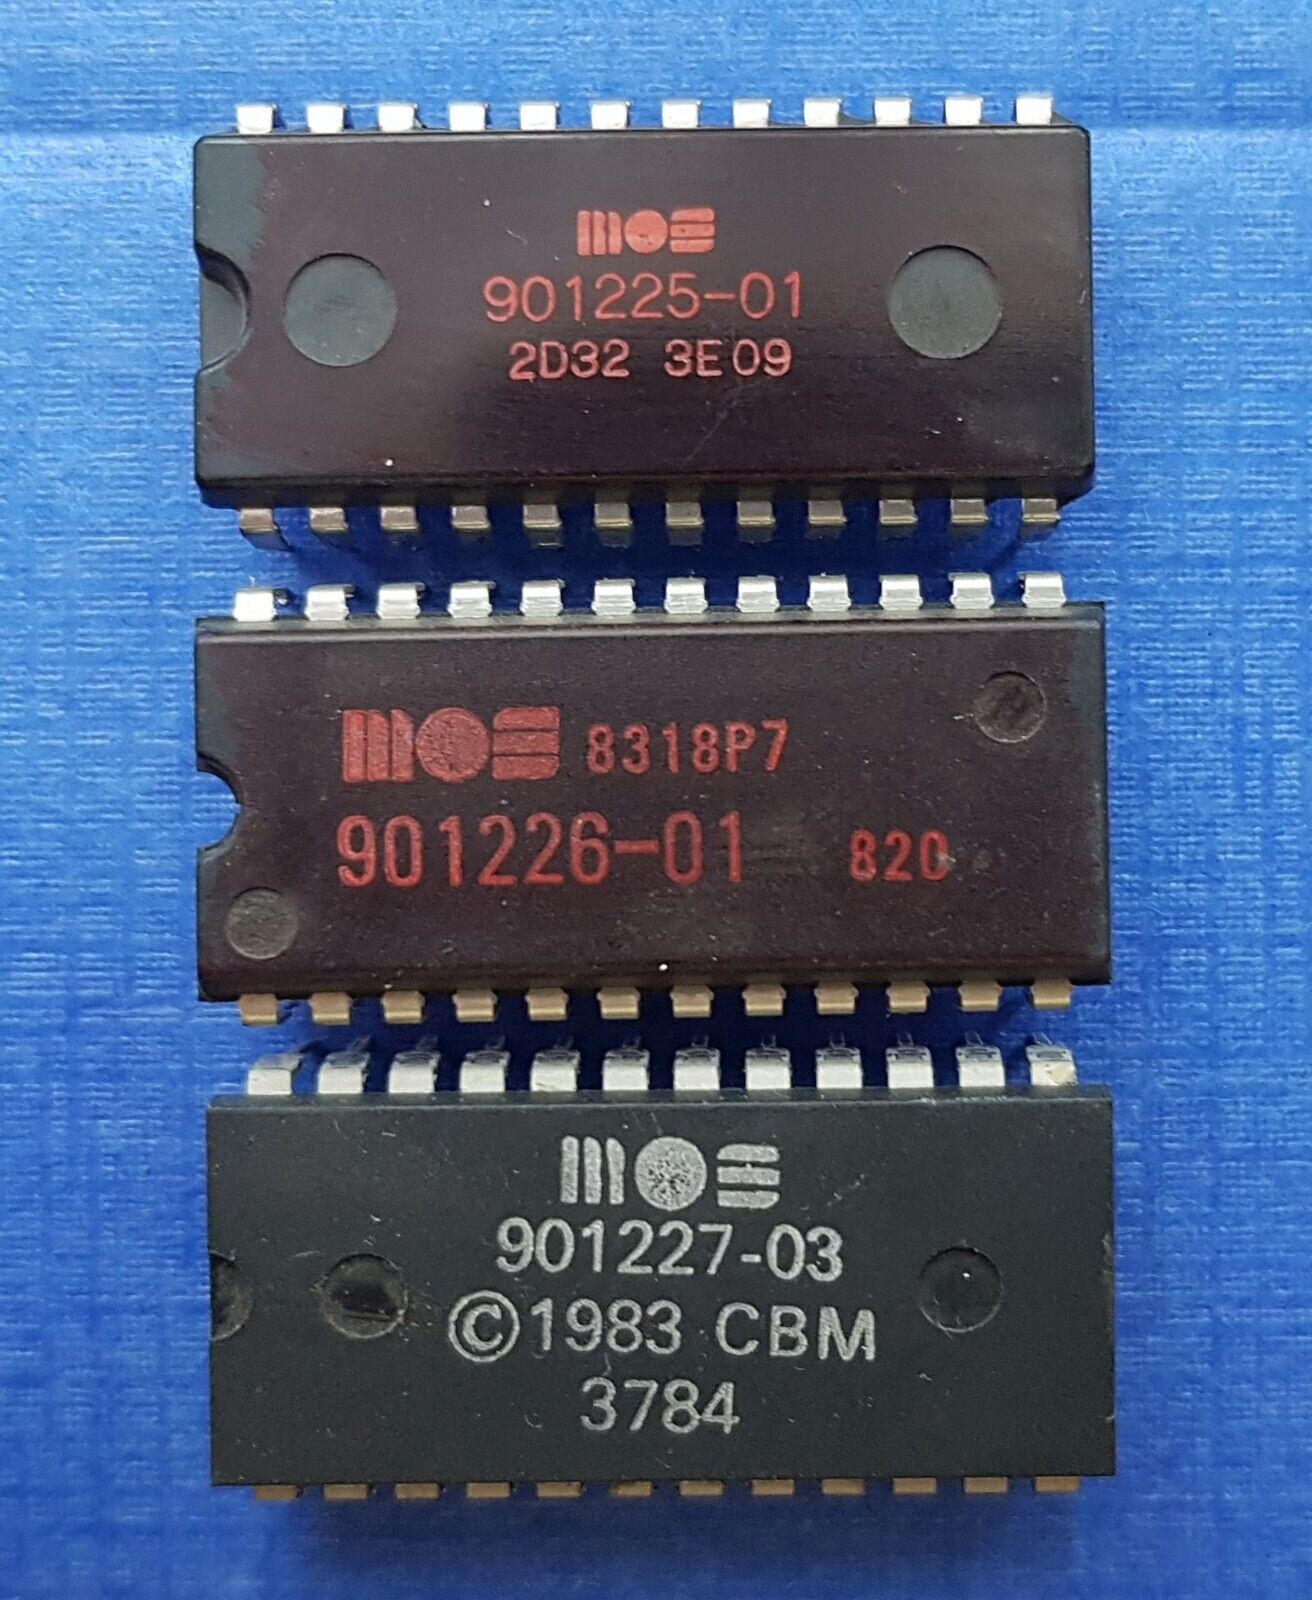 MOS 901225-01/901226-01/901227-03 Character/BASIC/Kernal ROM chips Commodore 64